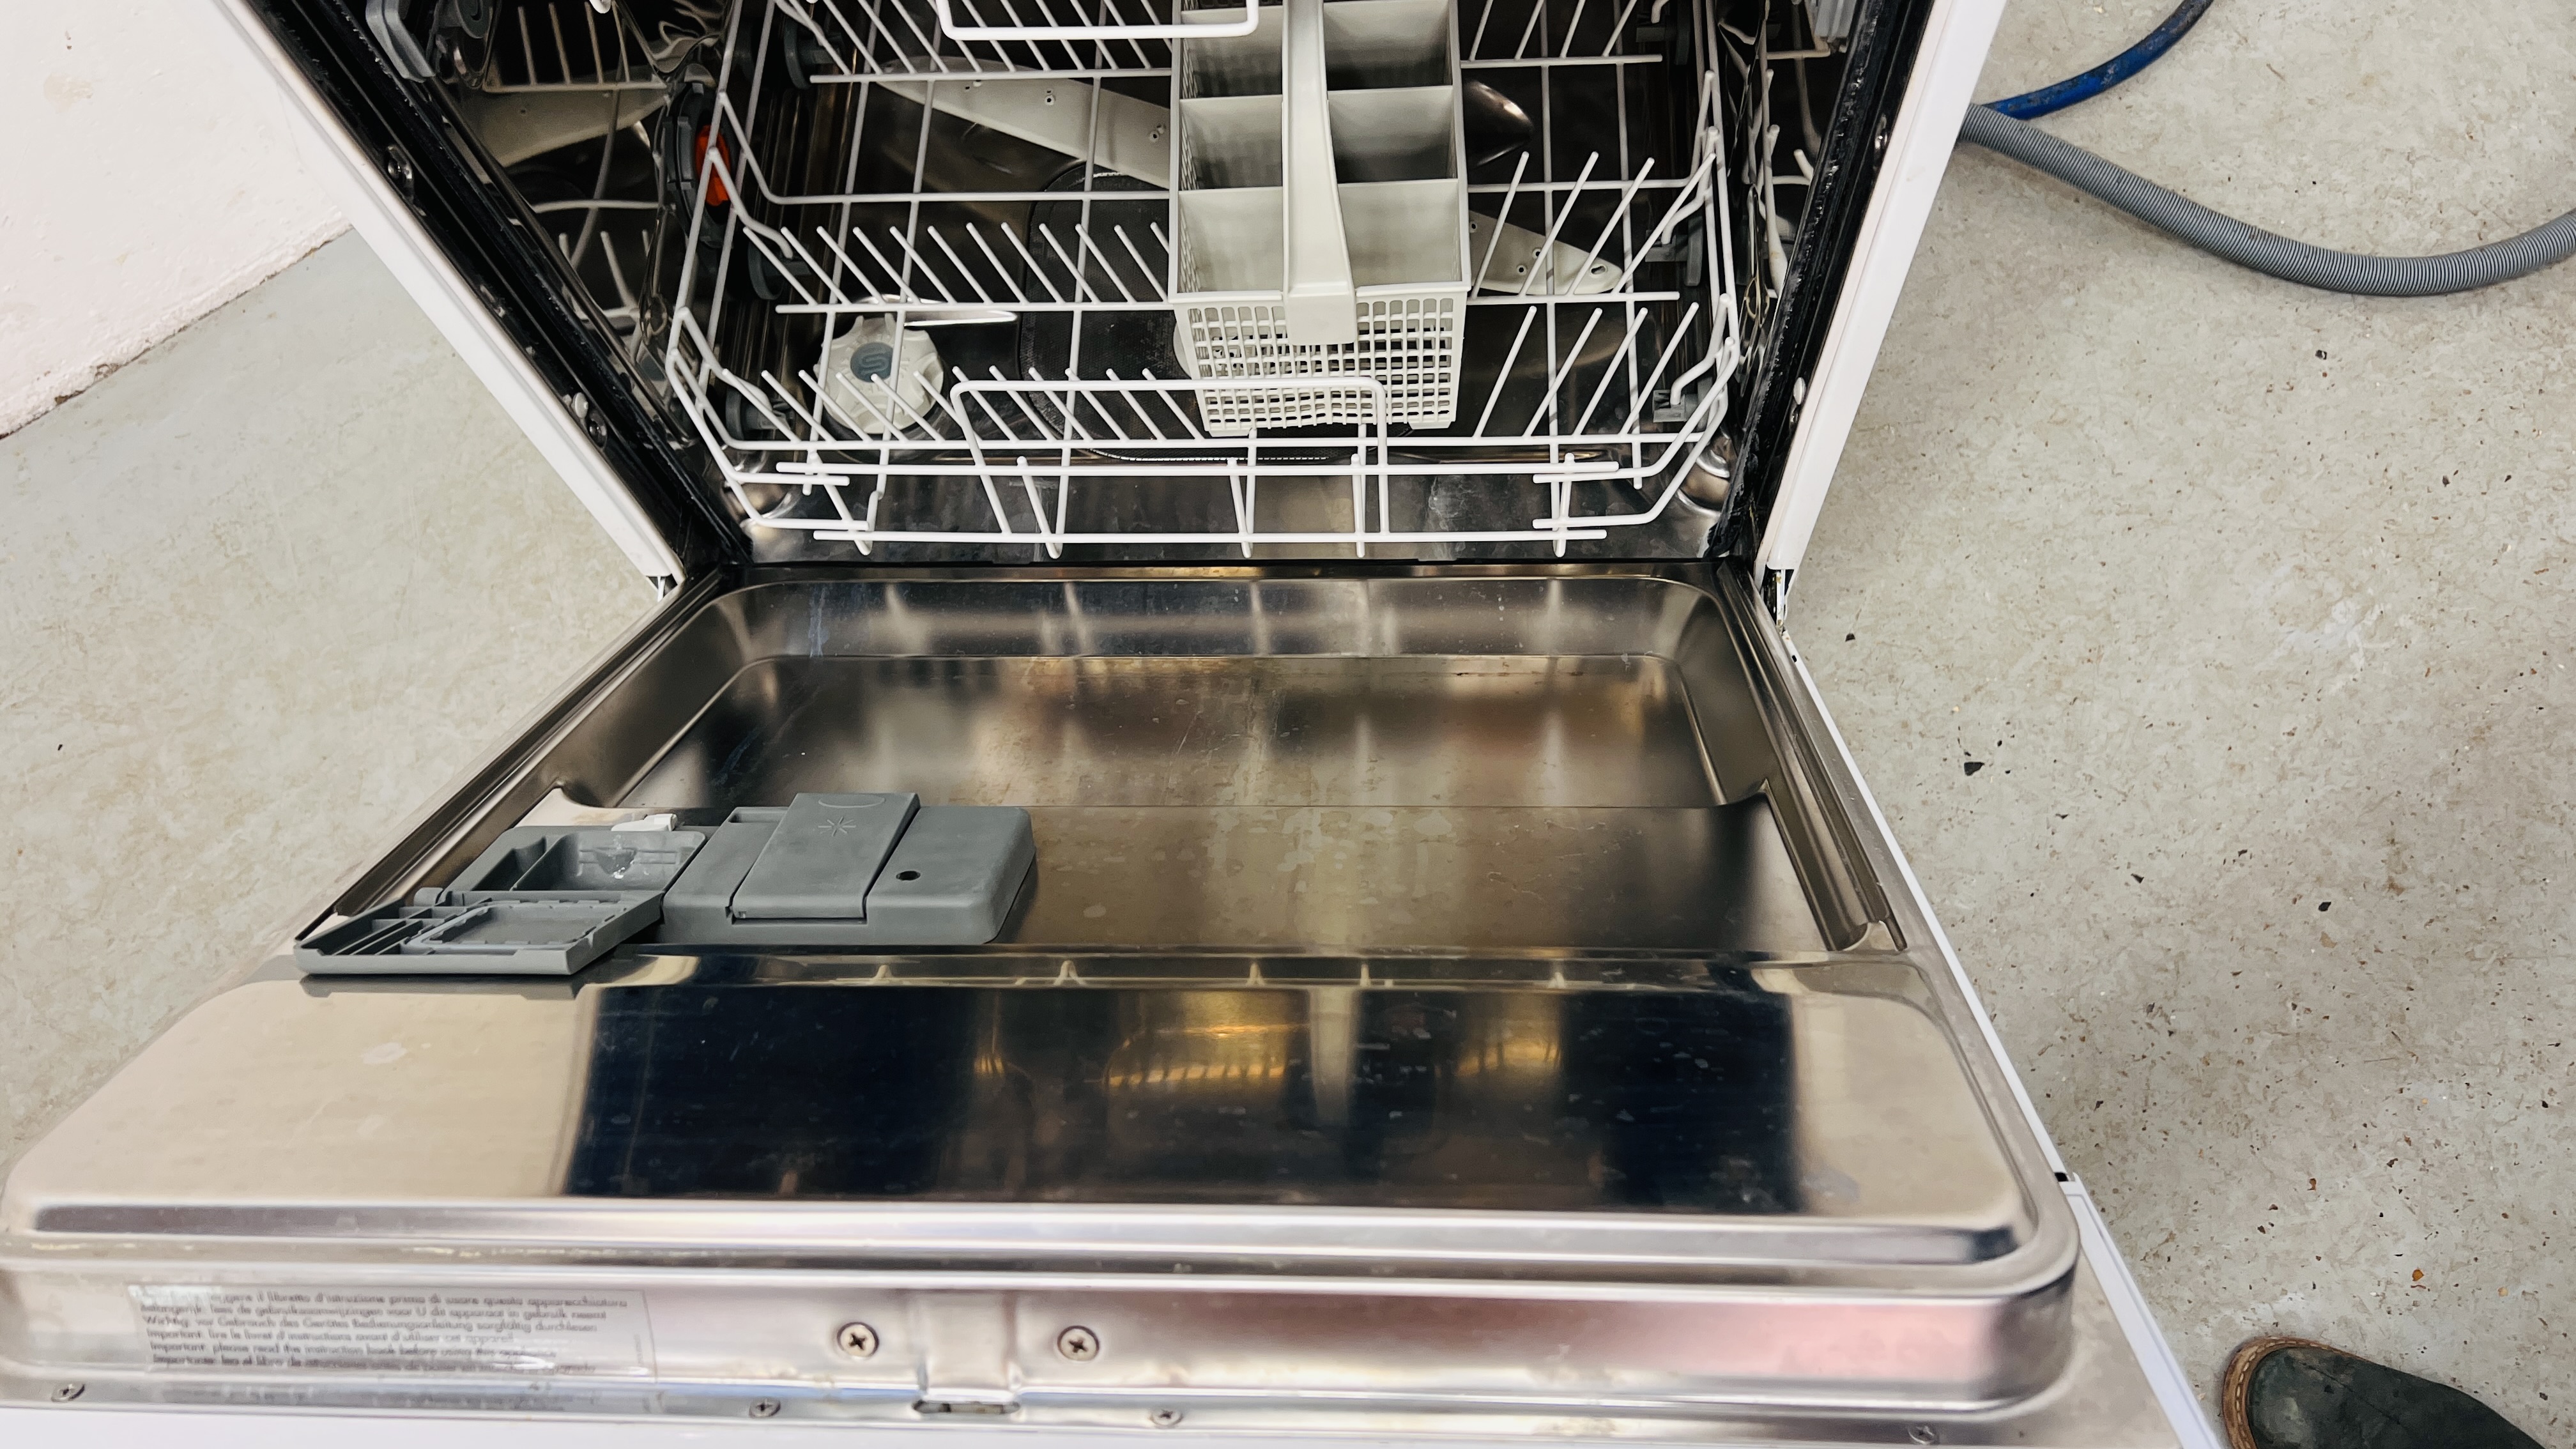 BENDIX BDW 55 DISHWASHER - SOLD AS SEEN. - Image 5 of 6